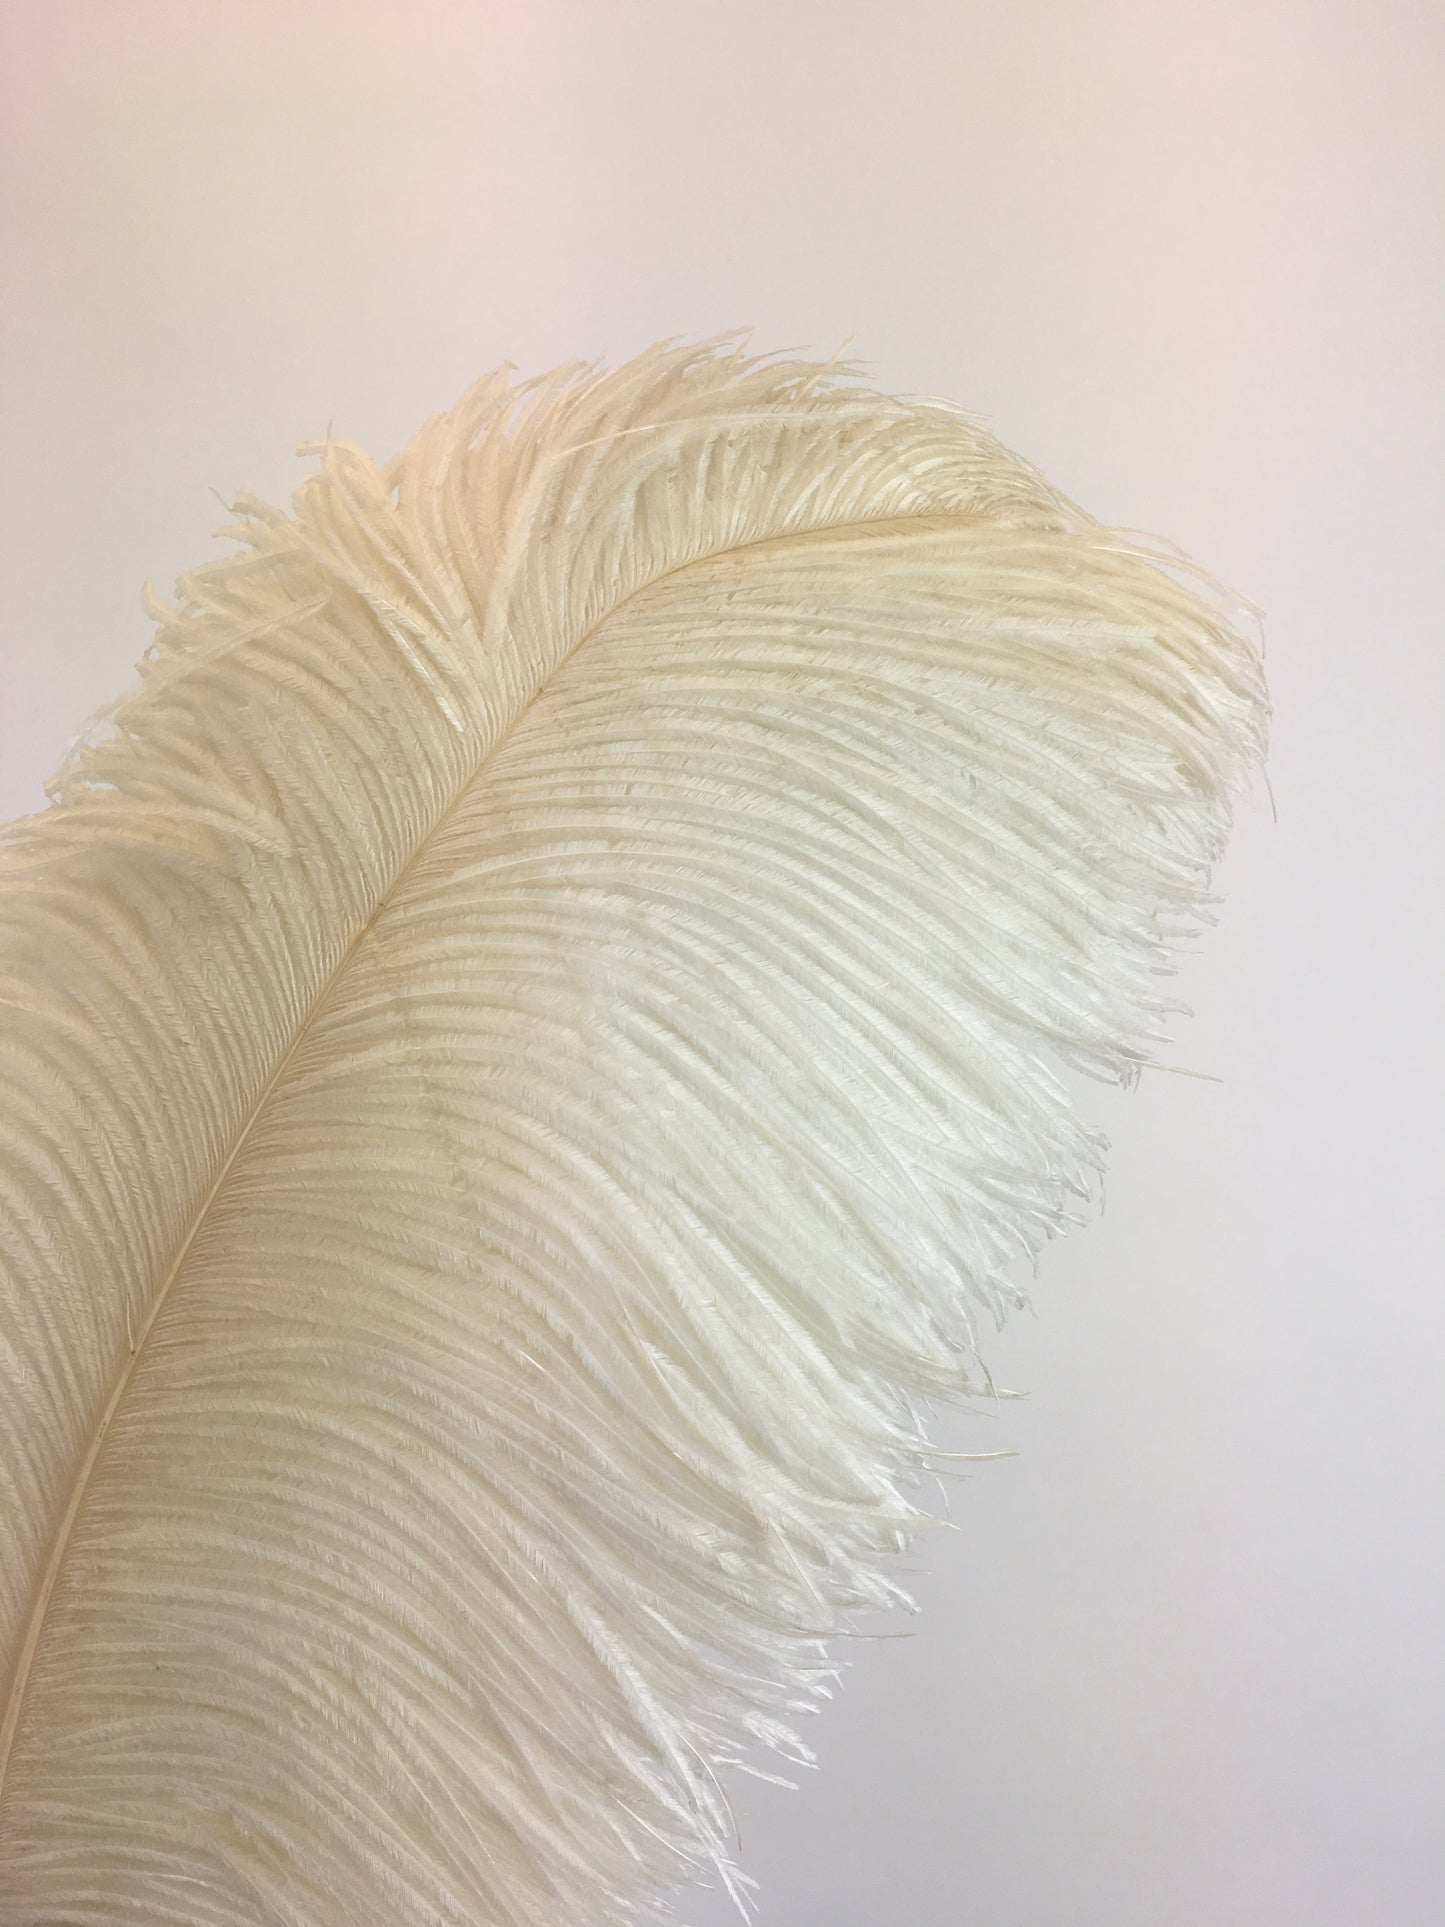 Original 1920's Sublime Single Ostrich Feather Plume - With Cream Celluloid Handle